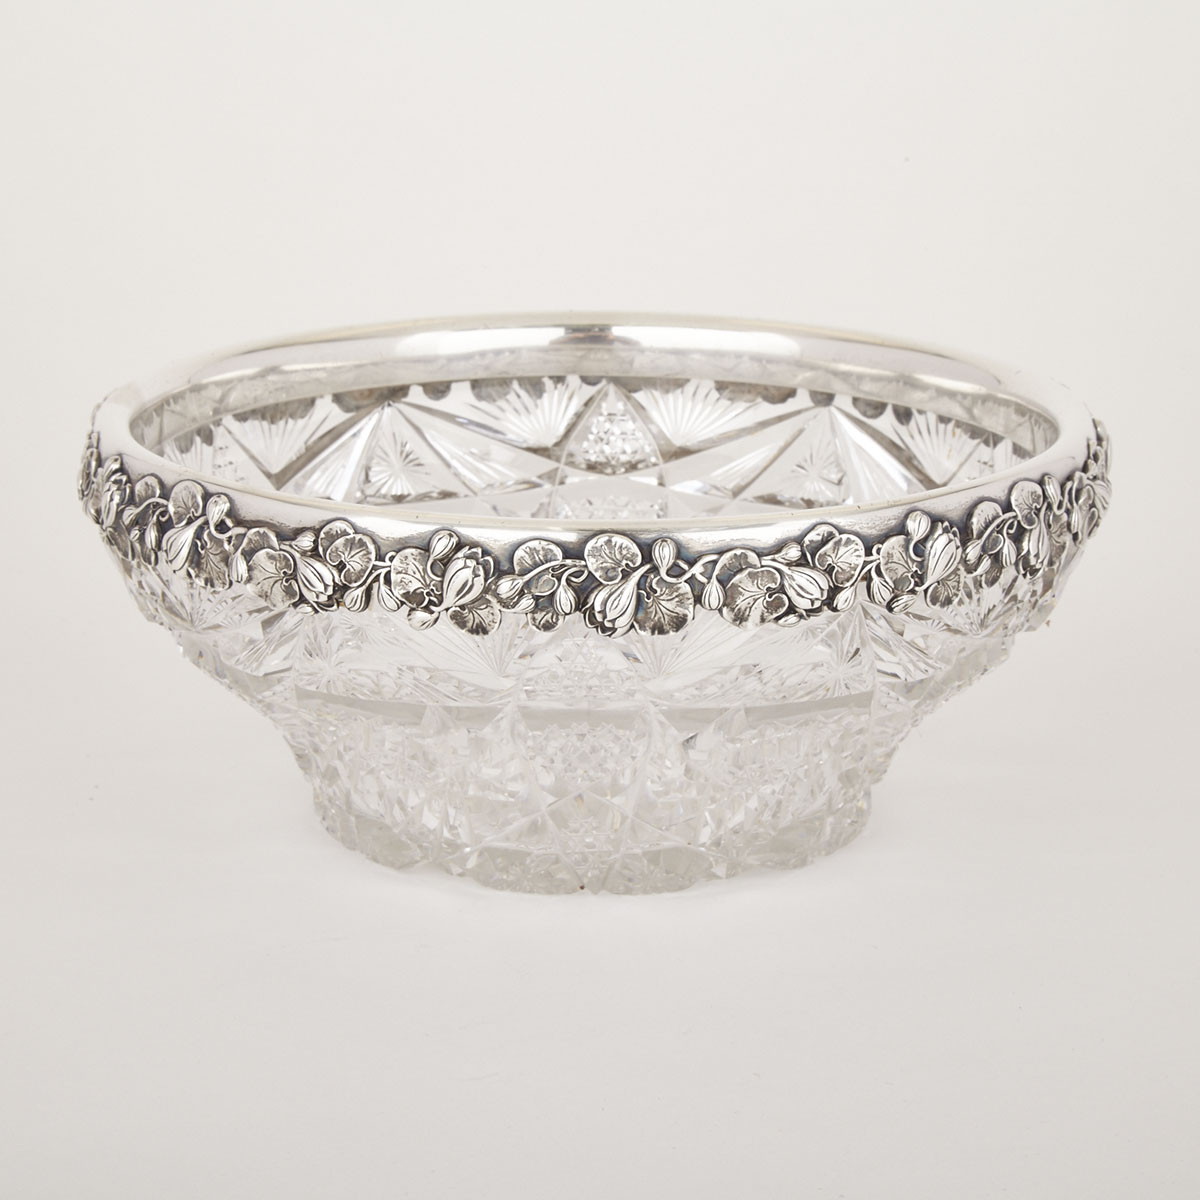 American Silver Mounted Cut Glass Bowl, Gorham Mfg. Co., Providence, R.I., early 20th century